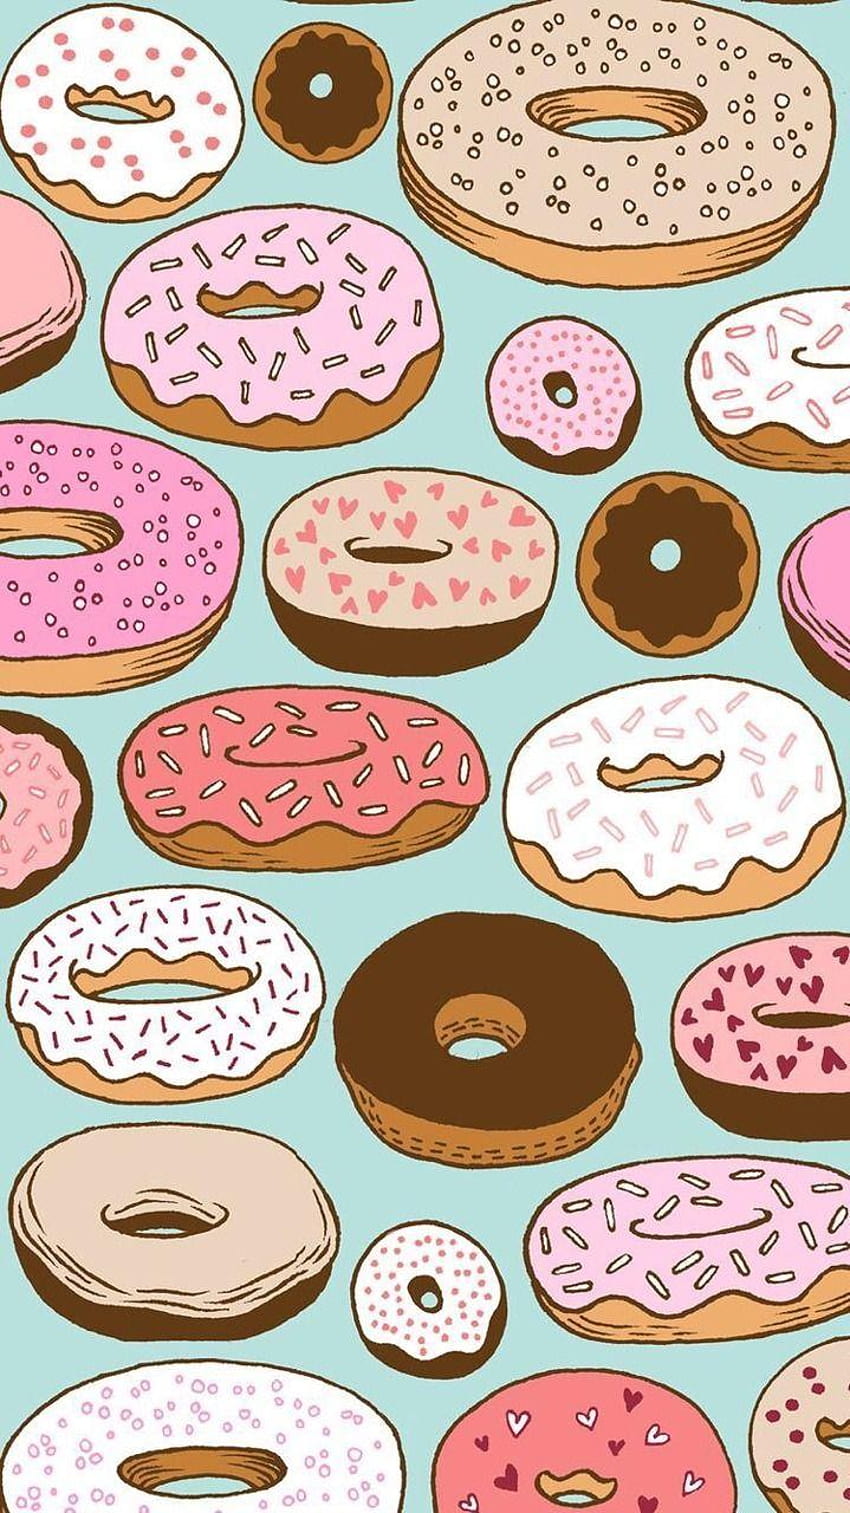 If You save: like or reblog, national donut day HD phone wallpaper